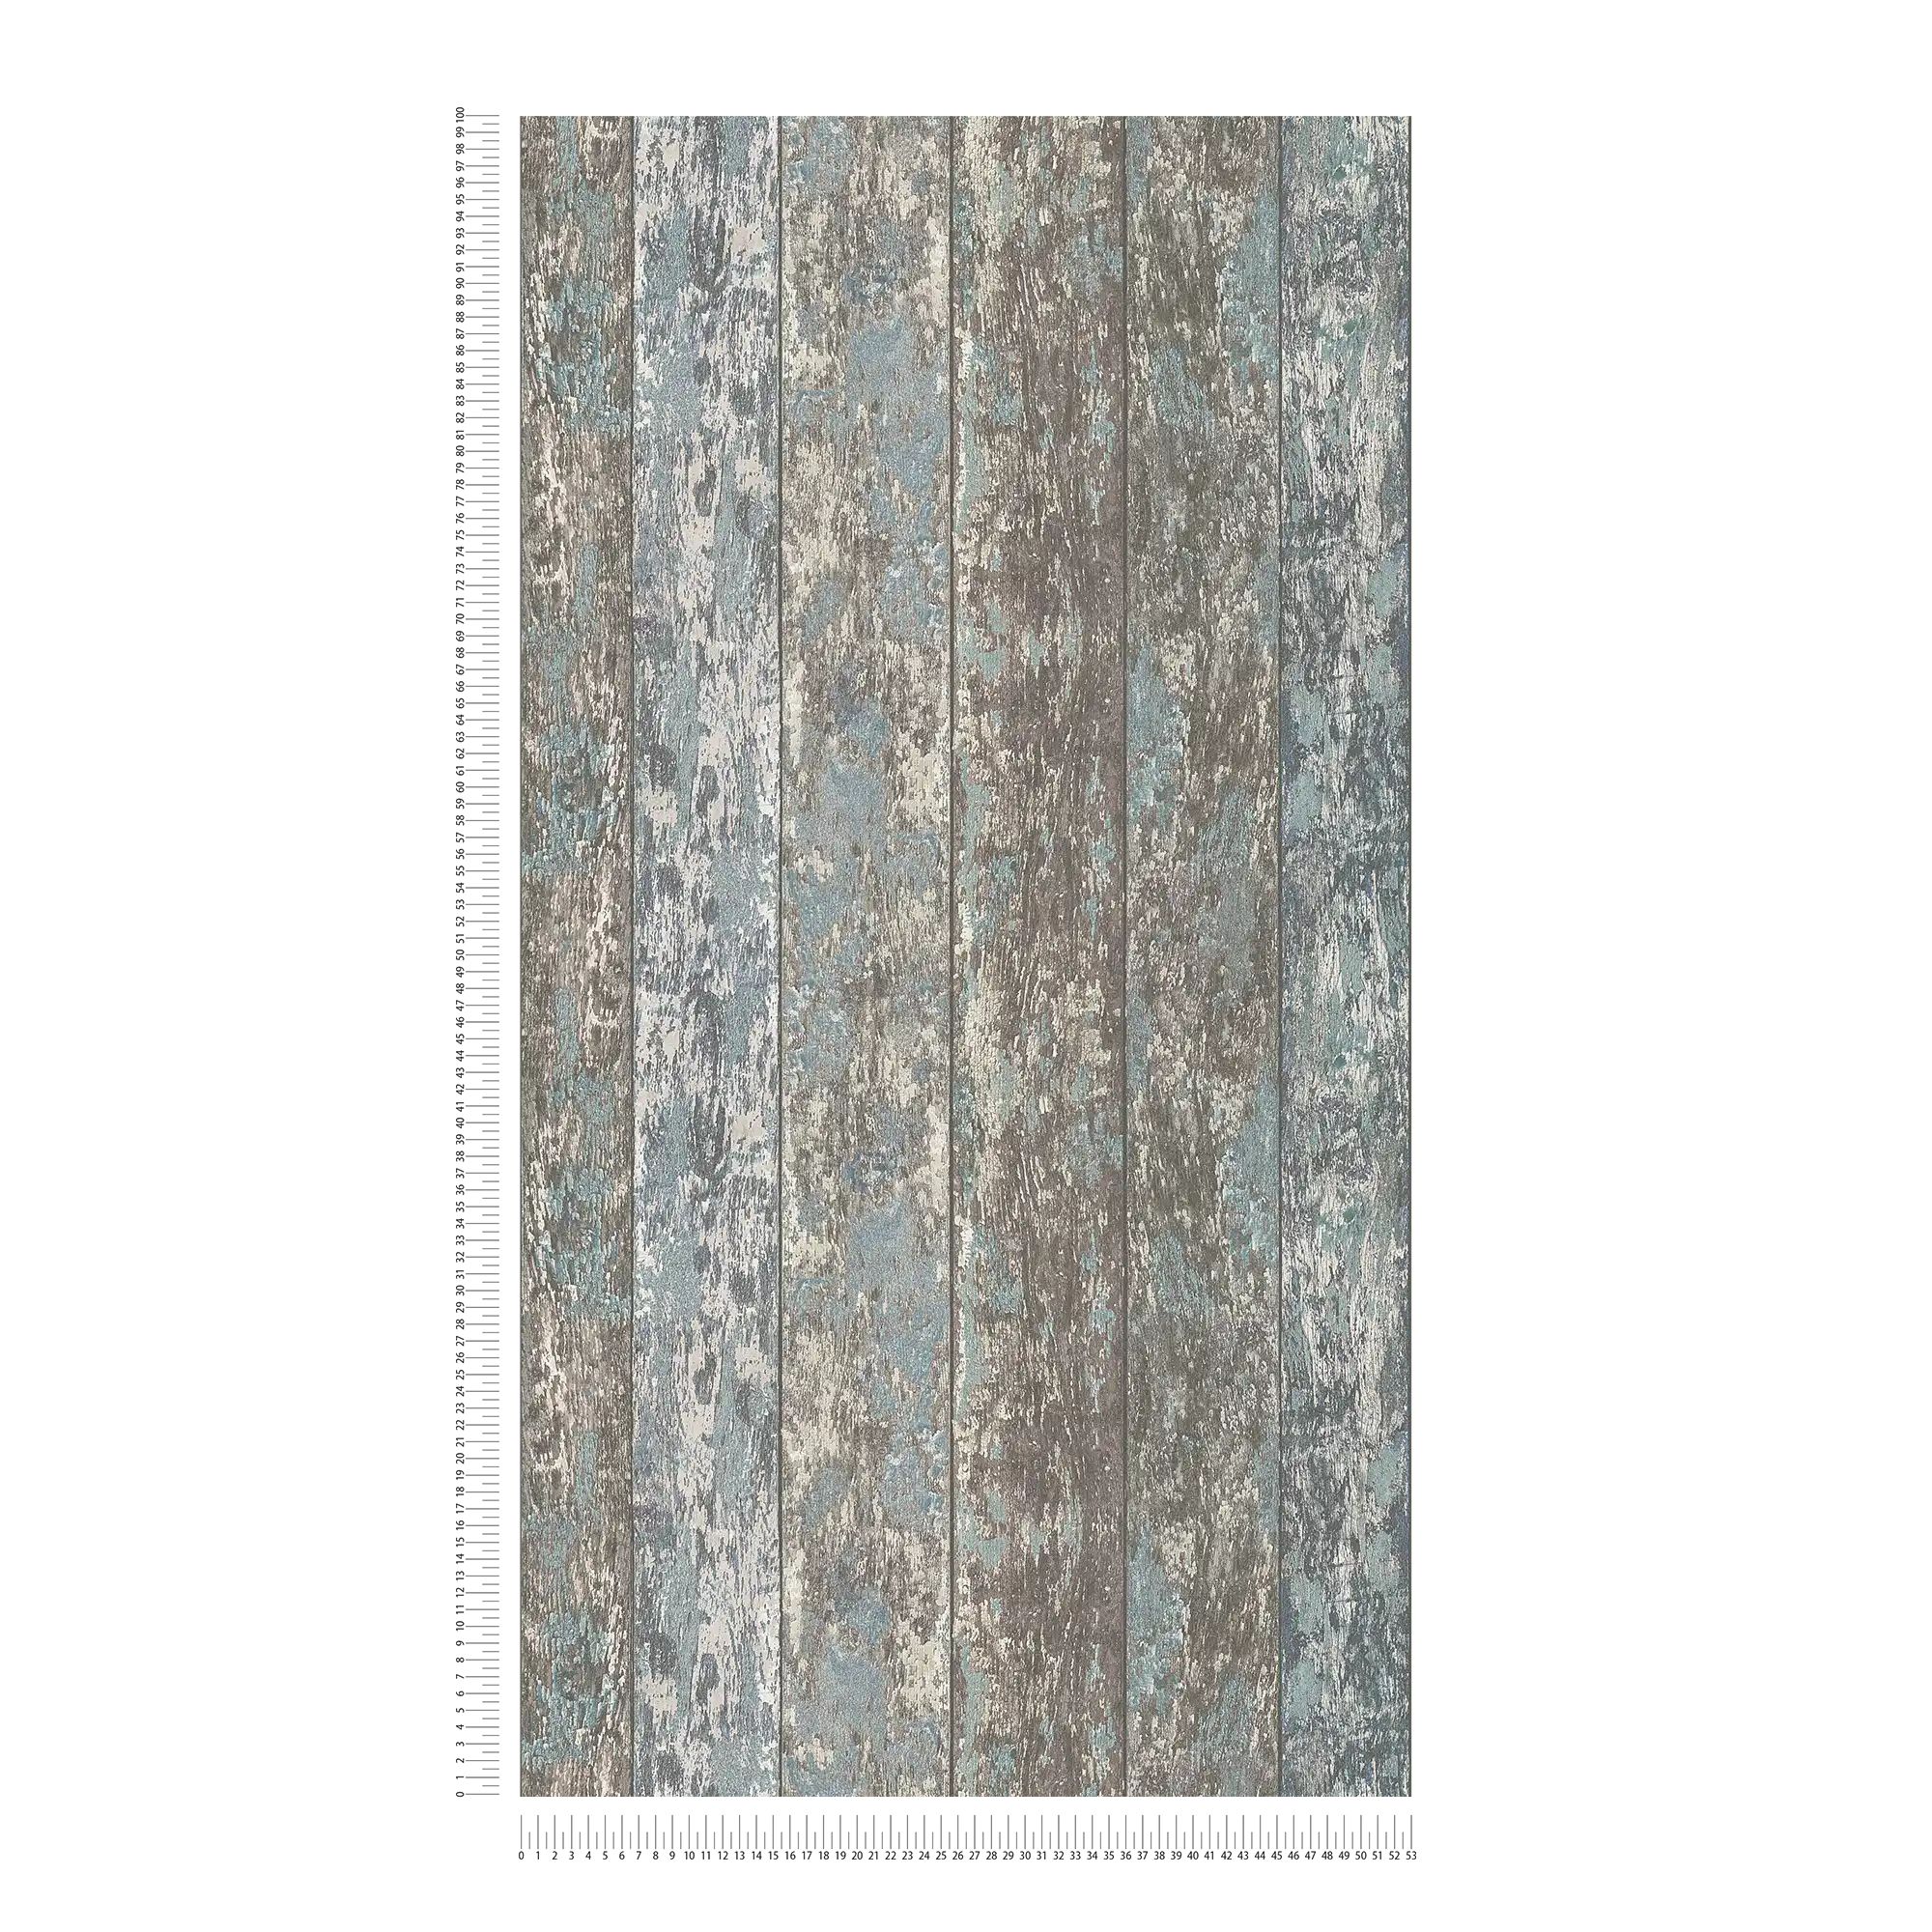             Wood effect non-woven wallpaper in shabby chic used look - blue, brown, grey
        